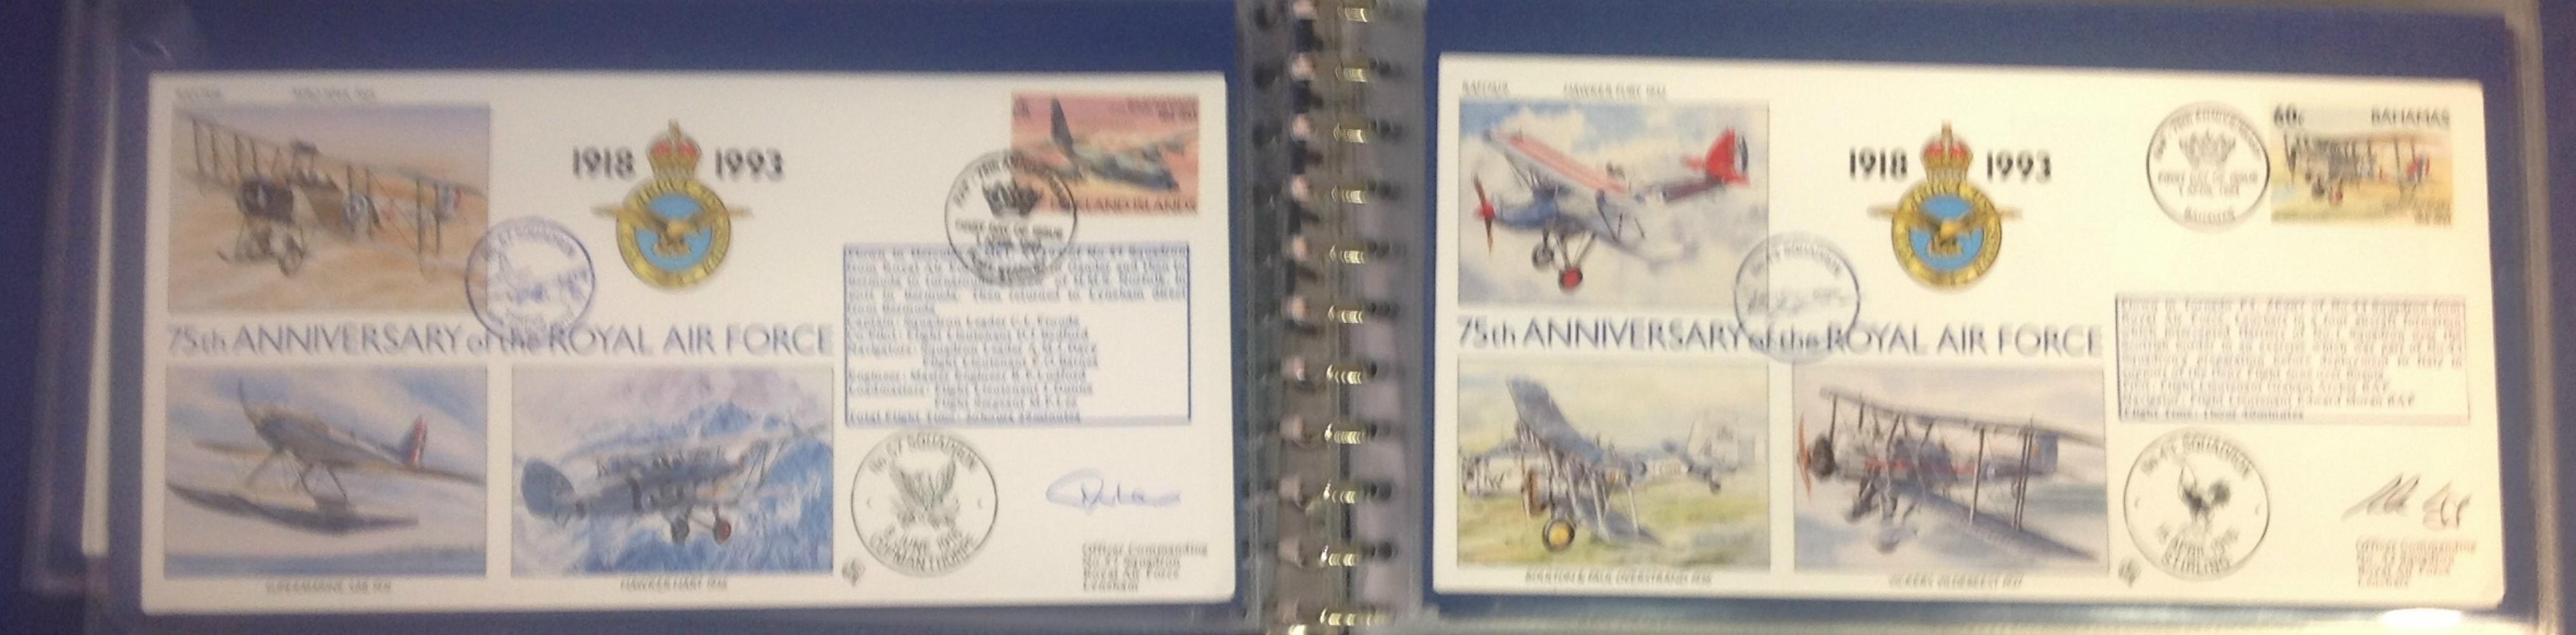 75th Ann RAF pilot signed collection. Complete set of the 30 covers in Blue Logoed RAF Album. Covers - Image 6 of 8